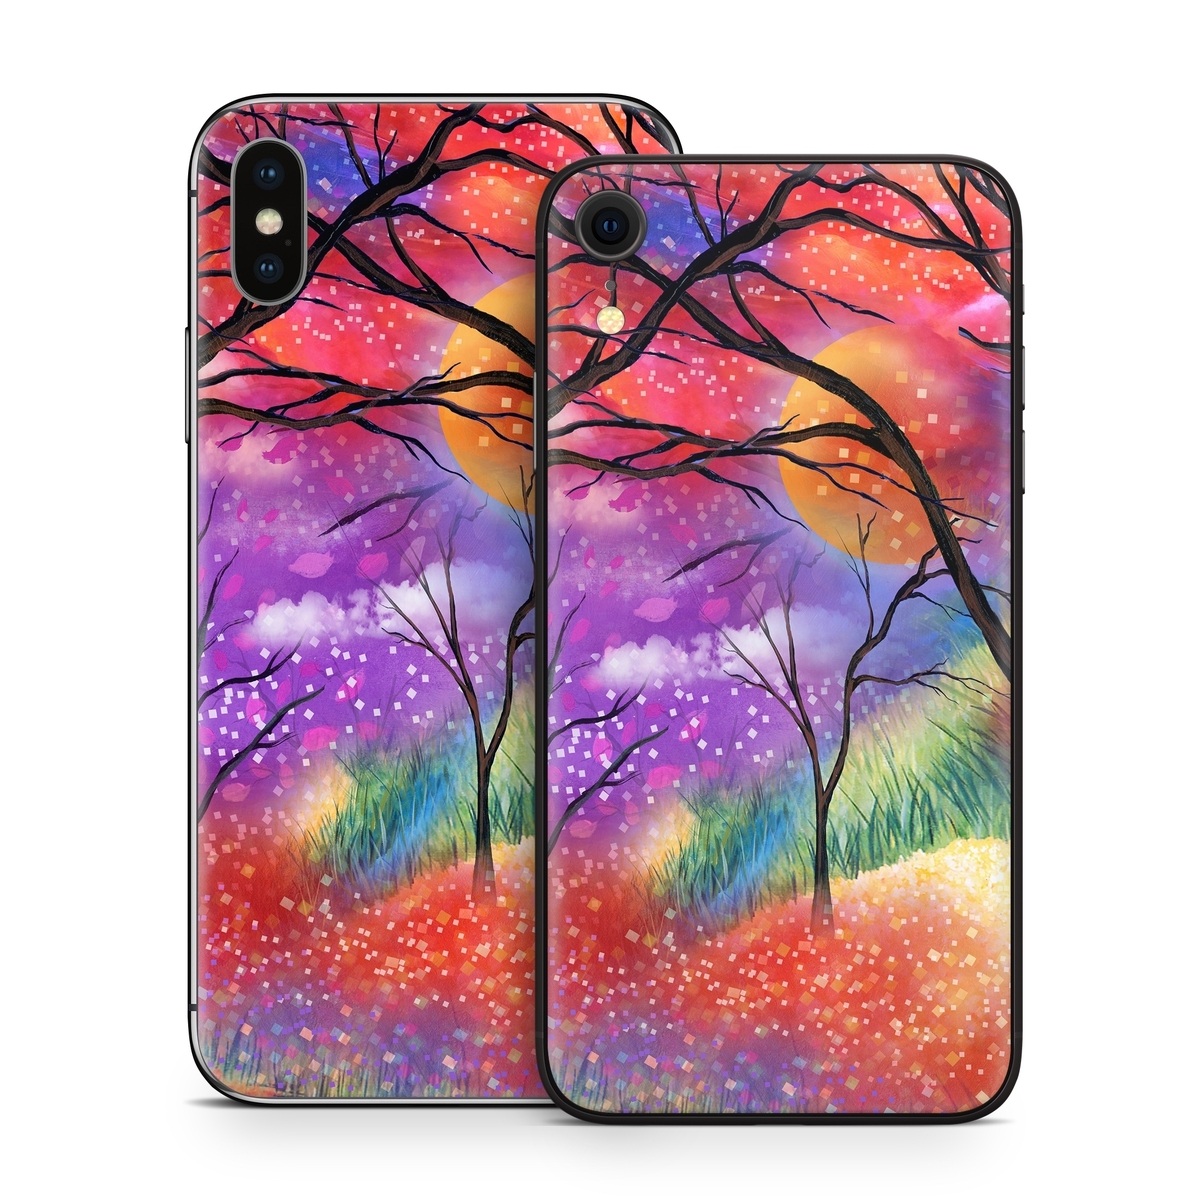 iPhone XS Skin design of Nature, Tree, Natural landscape, Painting, Watercolor paint, Branch, Acrylic paint, Purple, Modern art, Leaf, with red, purple, black, gray, green, blue colors